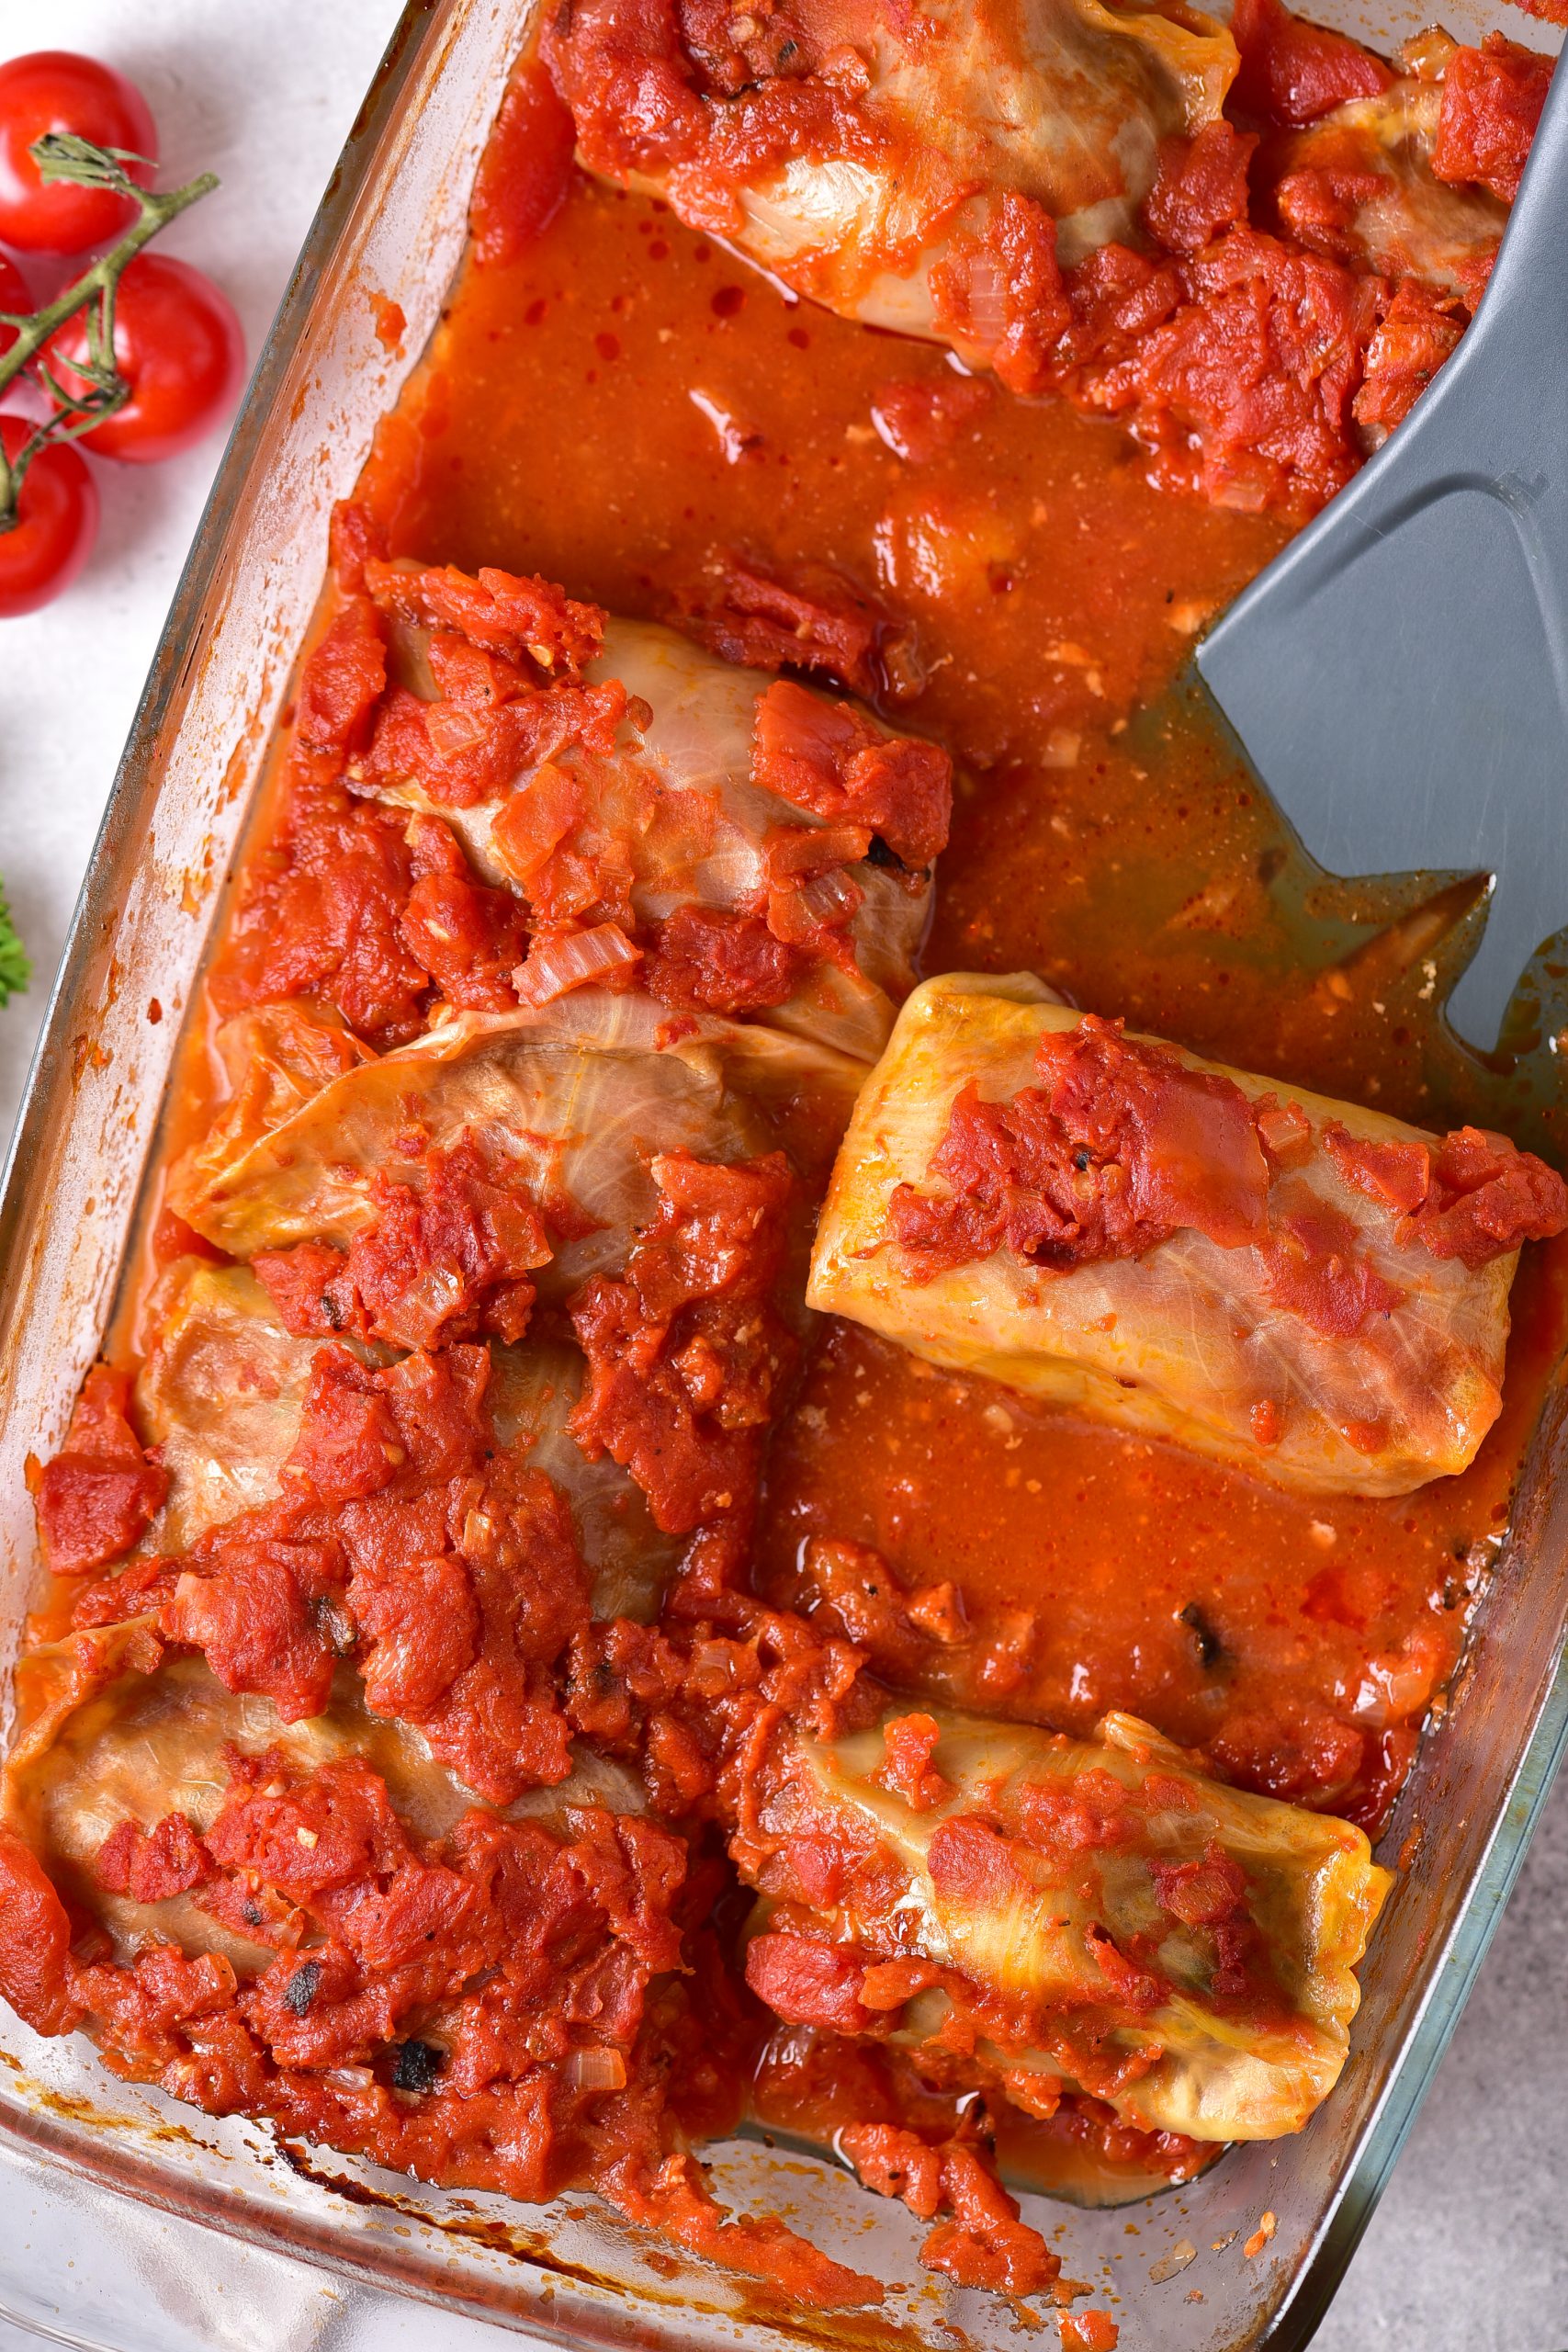 Stuffed Cabbage Rolls with Tomato Sauce, stuffed cabbage rolls, stuffed cabbage rolls recipe, how to make stuffed cabbage rolls